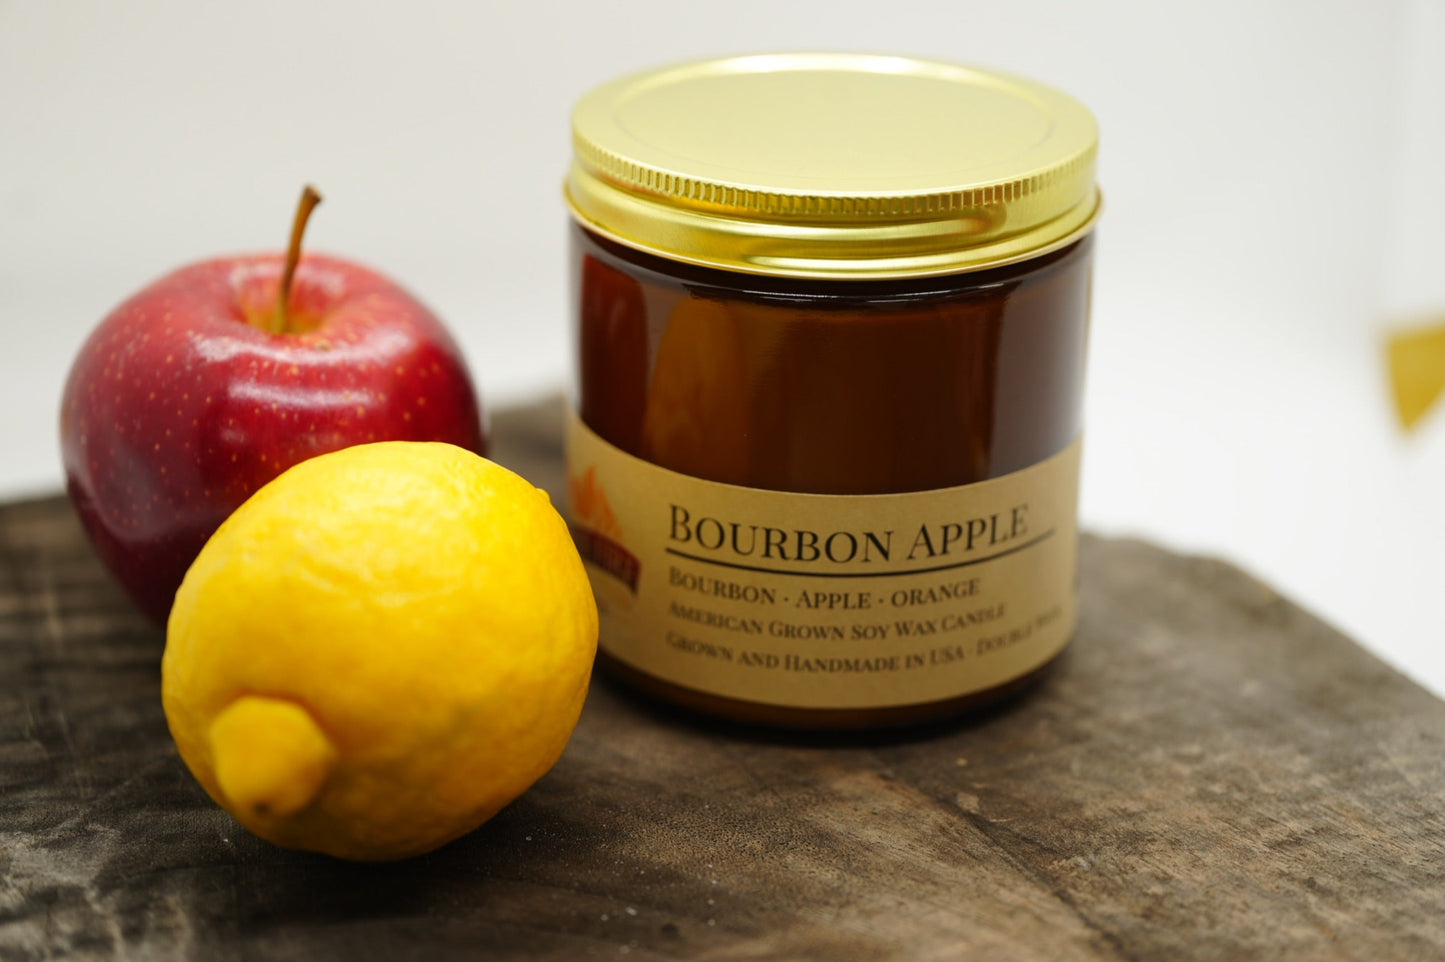 Bourbon Apple Soy Candle | 16 oz Double Wick Amber Apothecary Jar